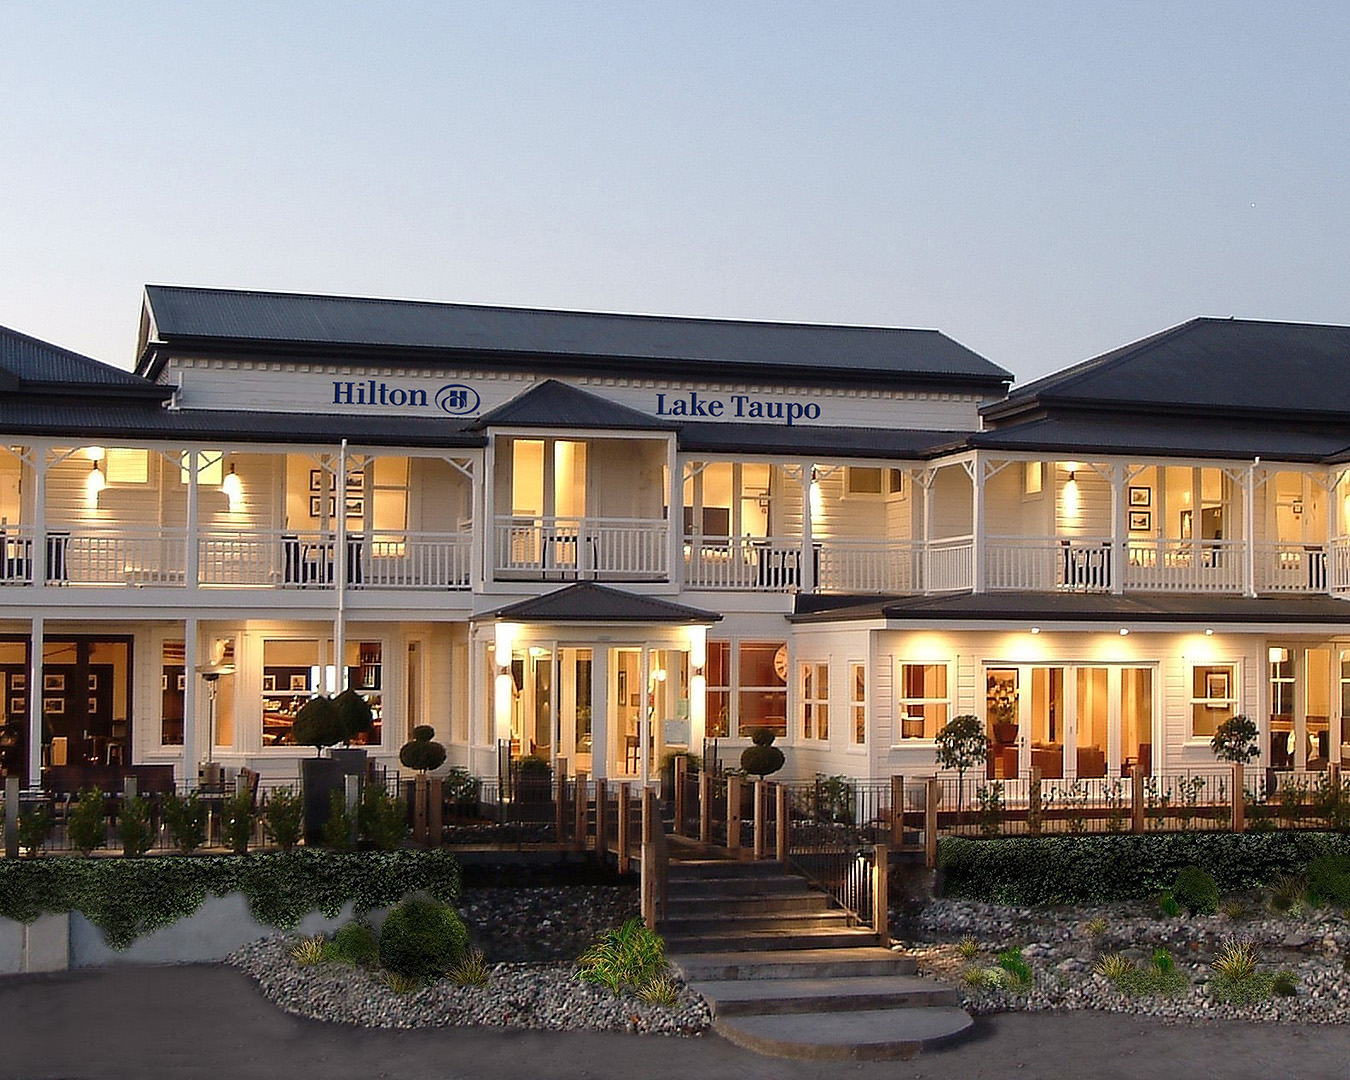 The exterior of Hilton Lake Taupo lit up by lights at dusk.